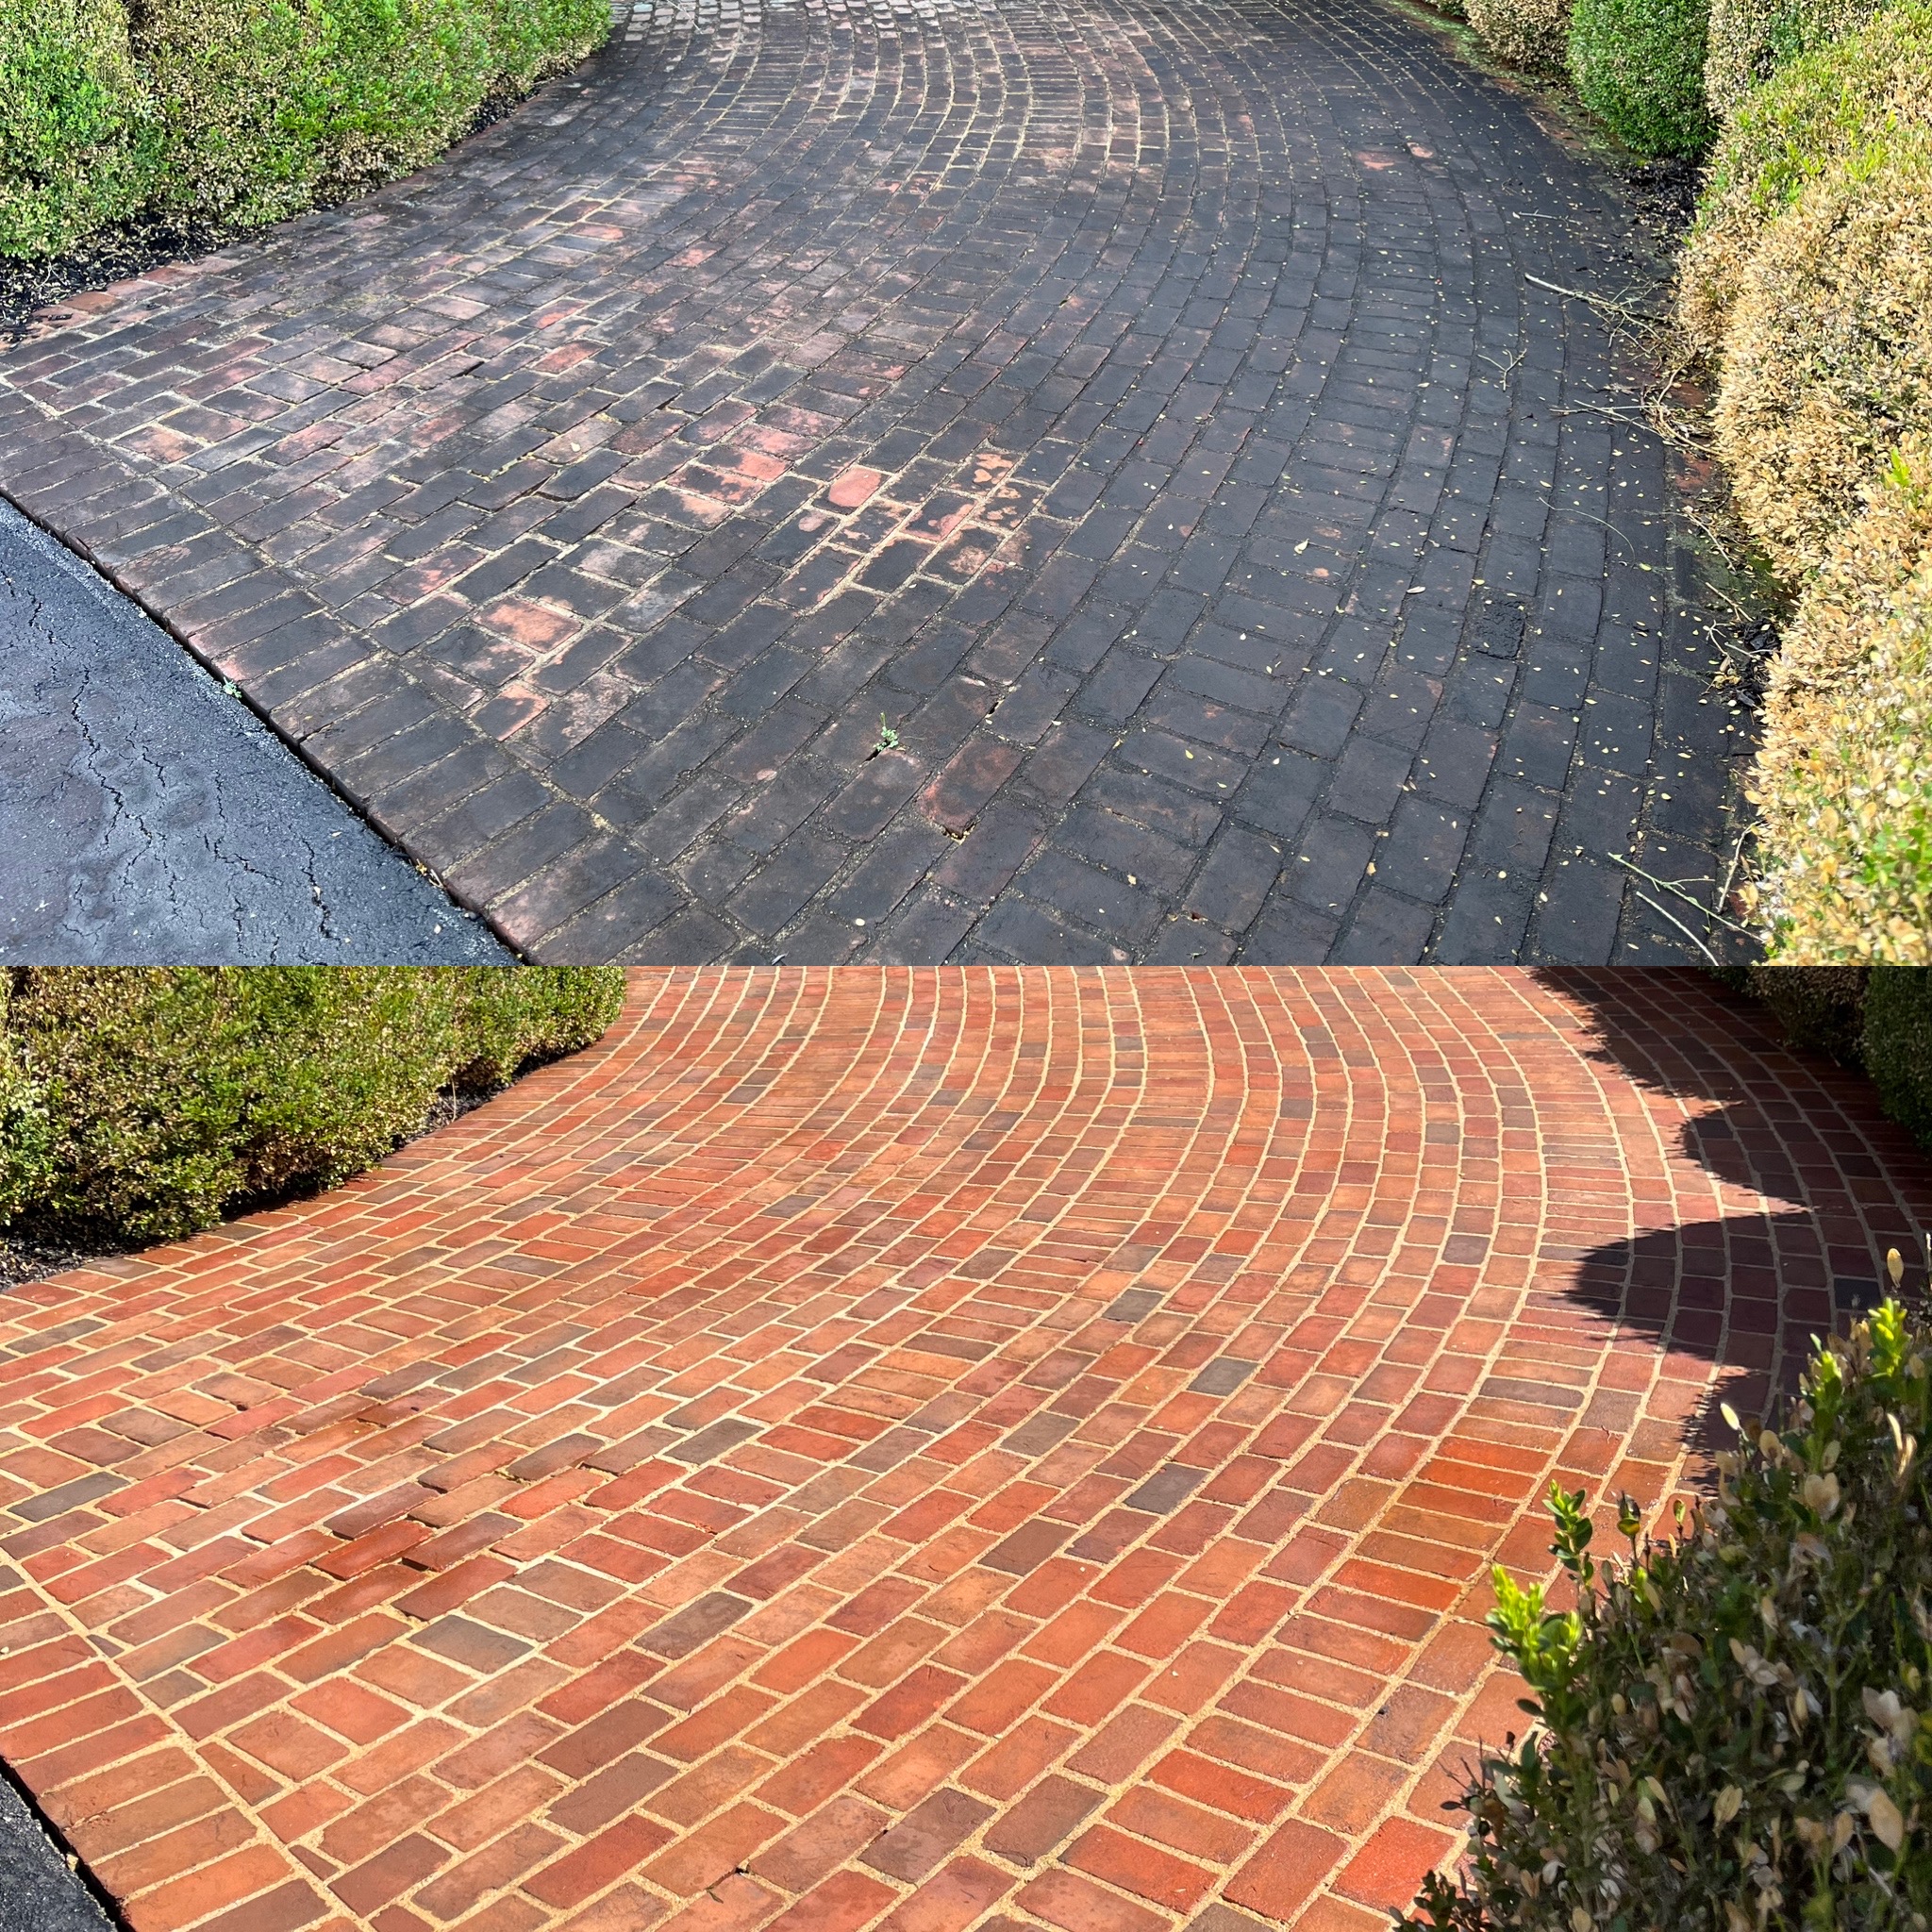 Top-Notch Driveway Cleaning in Lexington, KY with Bonus Brick Washing!